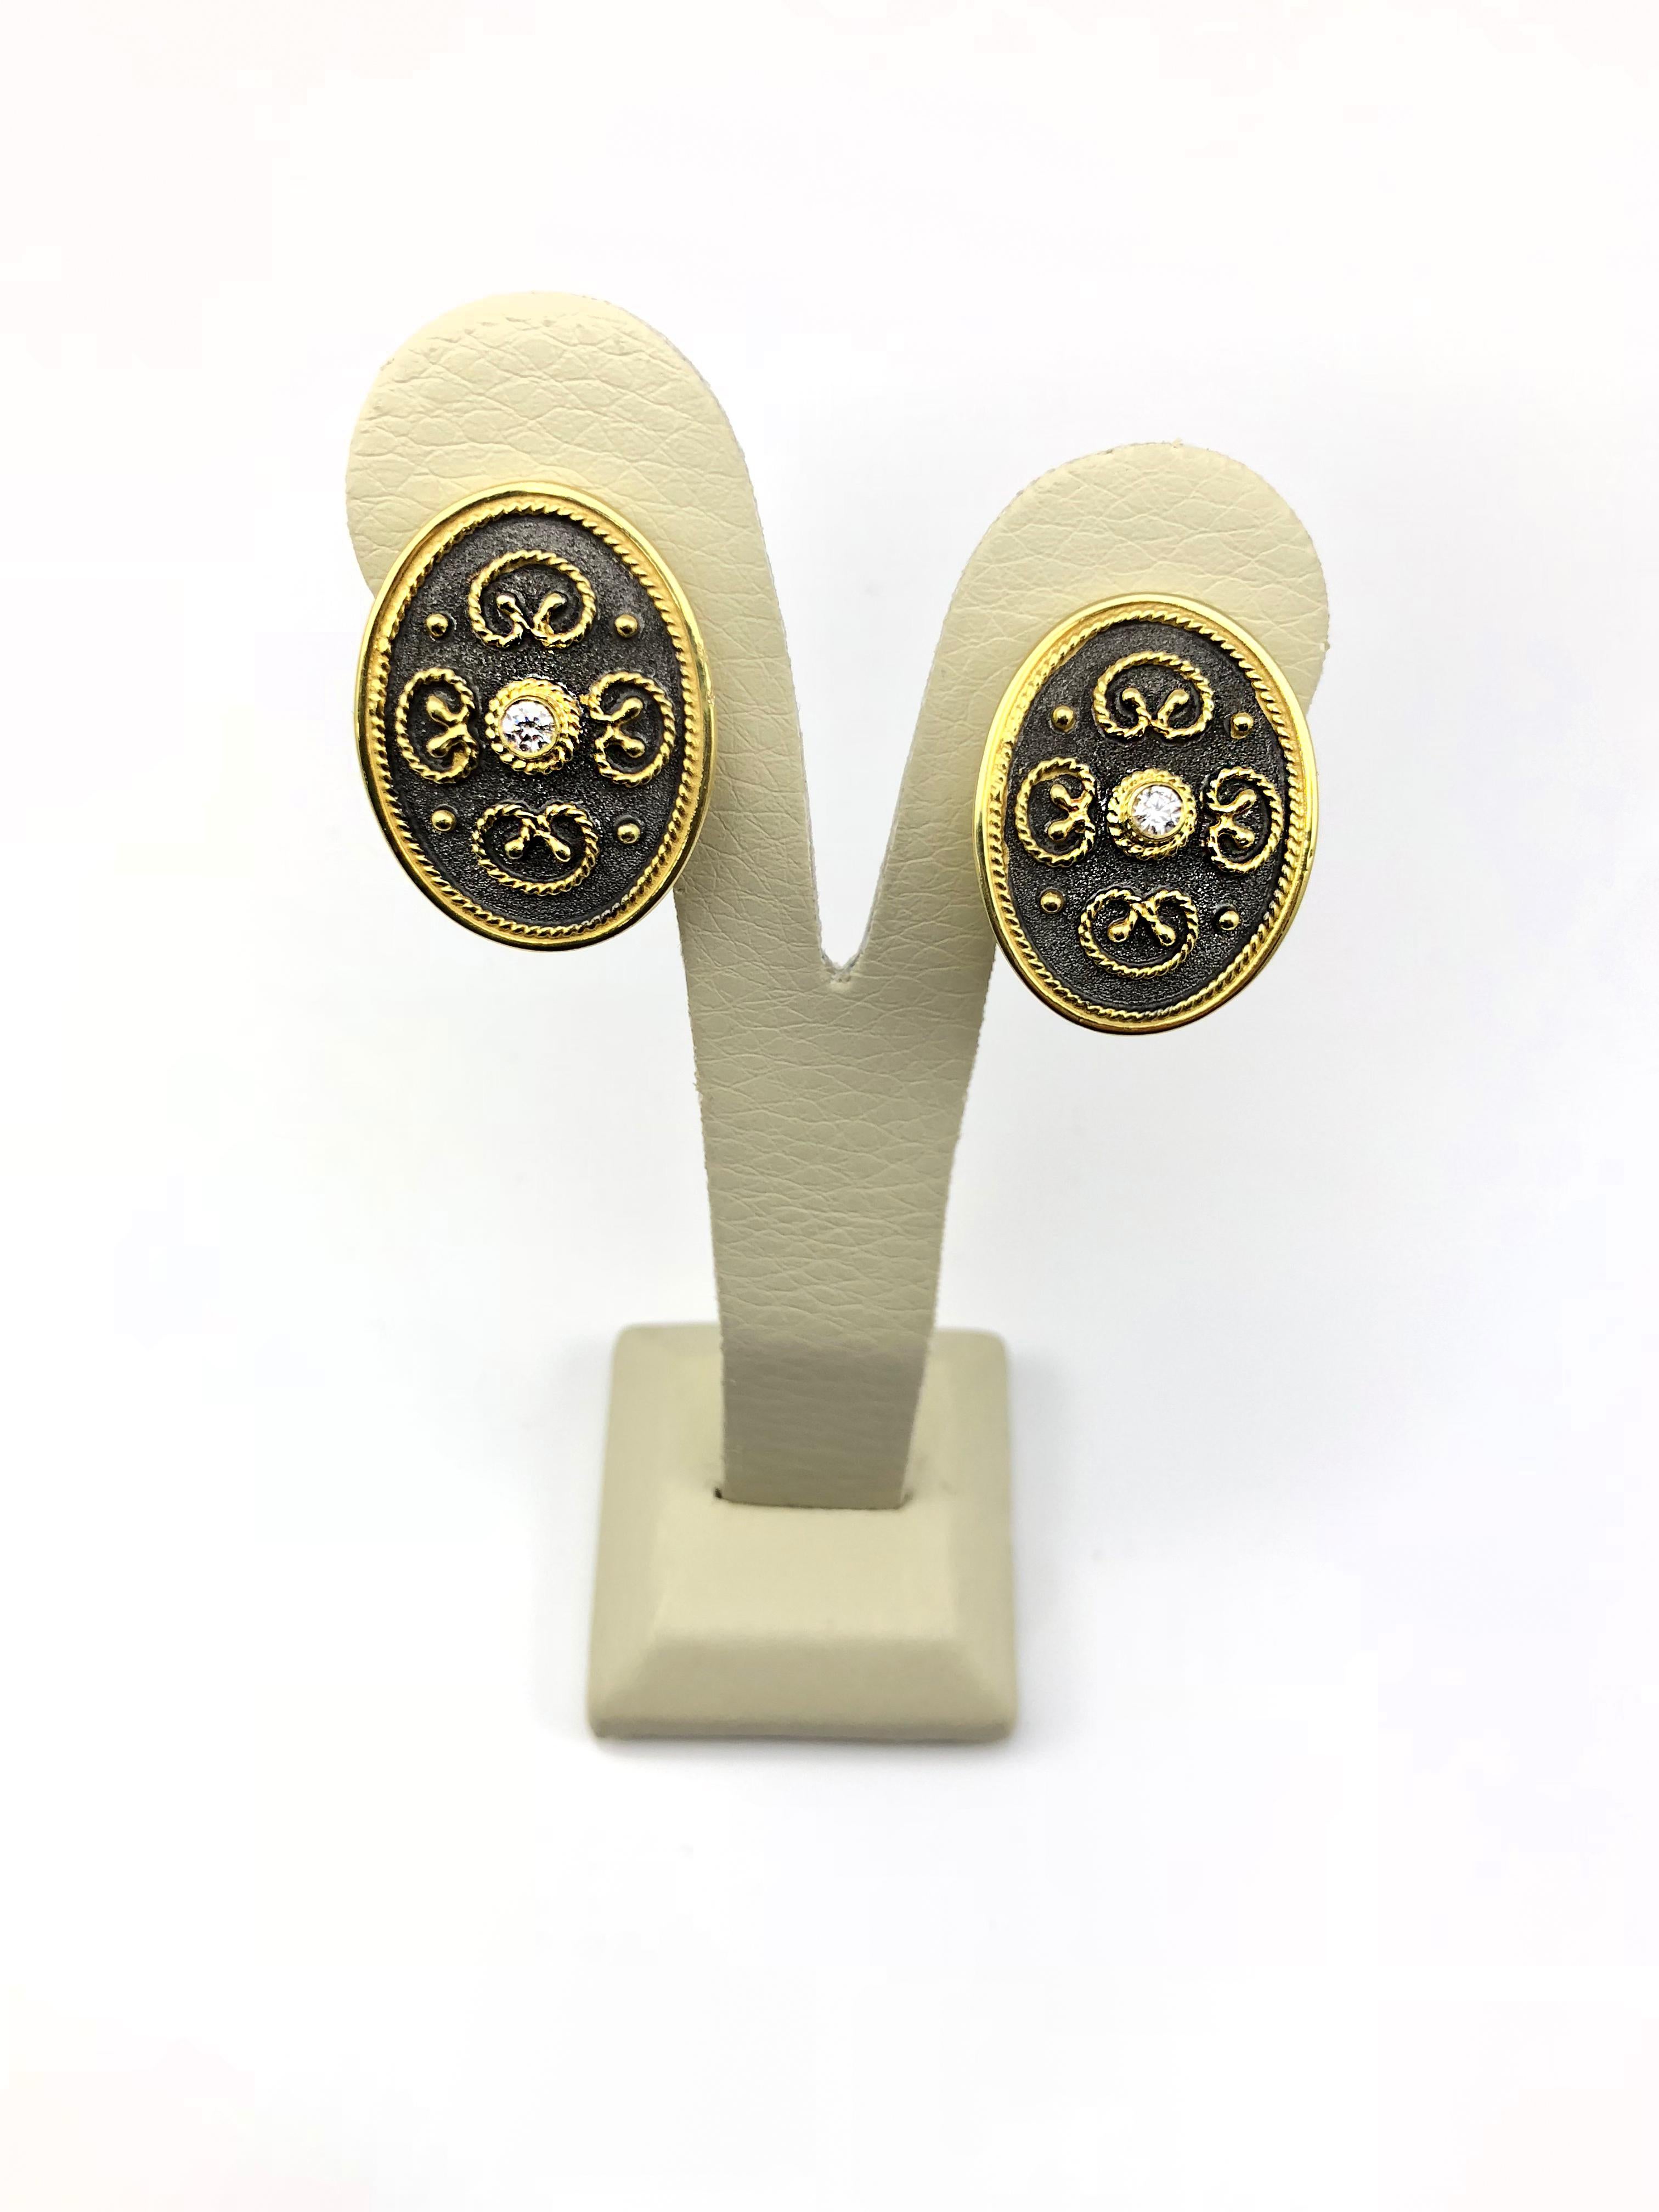 S.Georgios designer earrings are handmade from solid 18 Karat Yellow Gold and all custom-made. The stunning earrings are microscopically decorated with granulation -beads, and wires. Granulated details contrast with Byzantine velvet background in